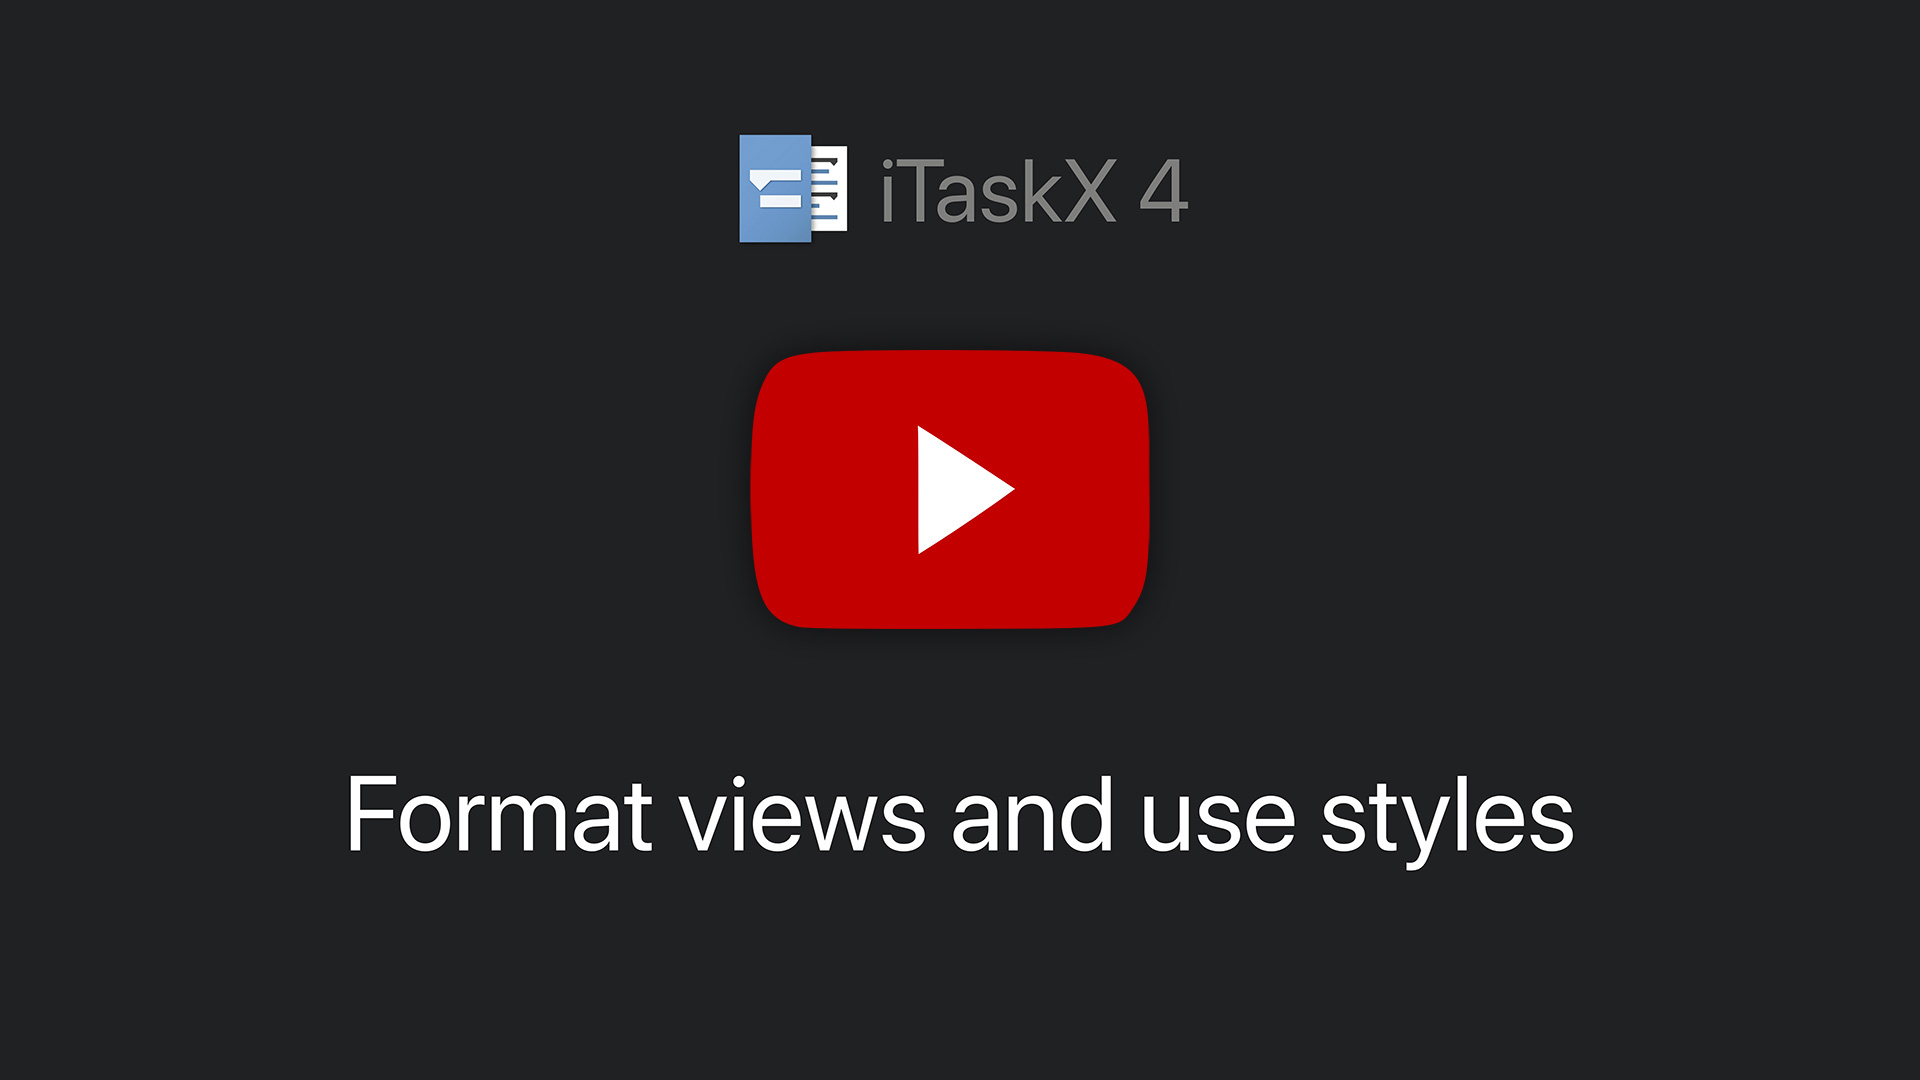 Format views and use styles in iTaskX